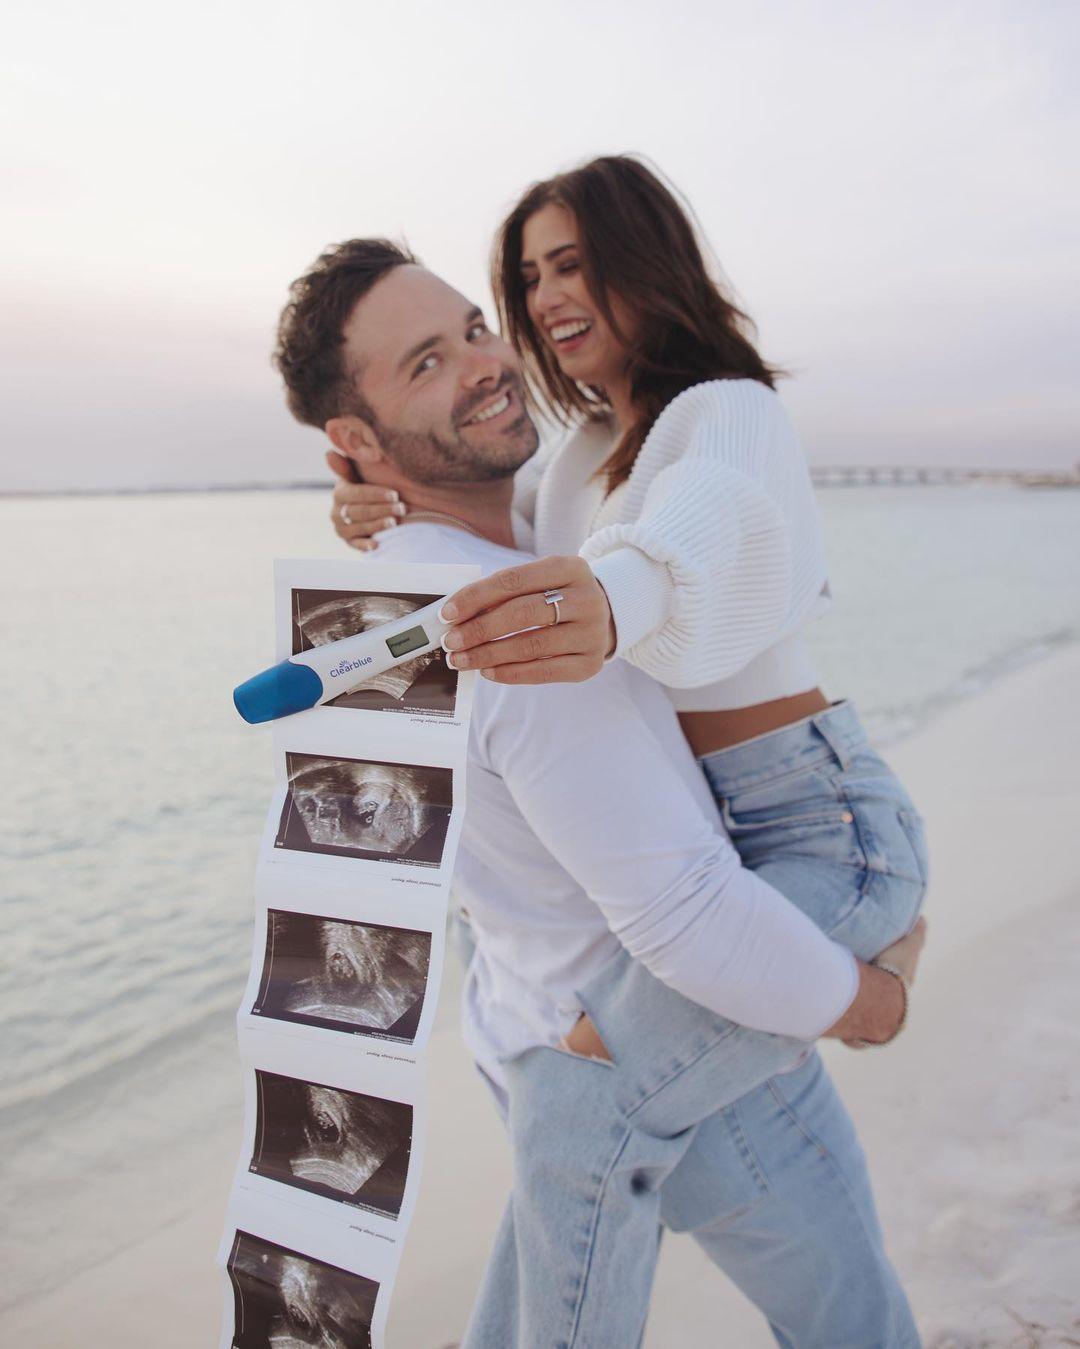 April Marie Shares Tribute To Unborn Child In Pregnancy Announcement